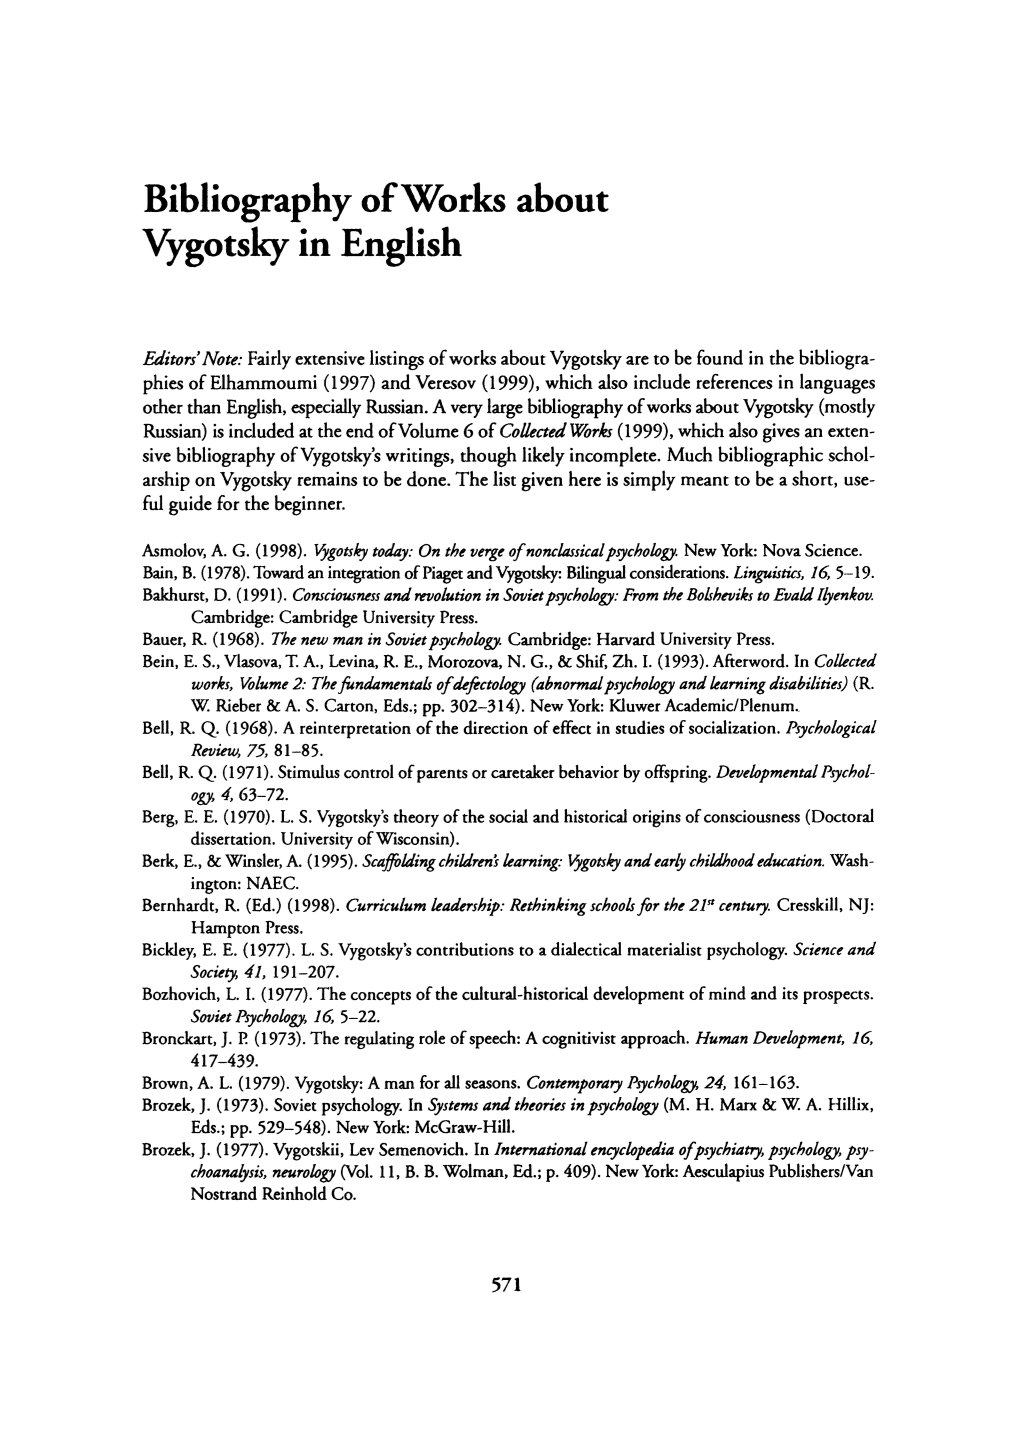 Bibliography of Works About Vygotsky in English